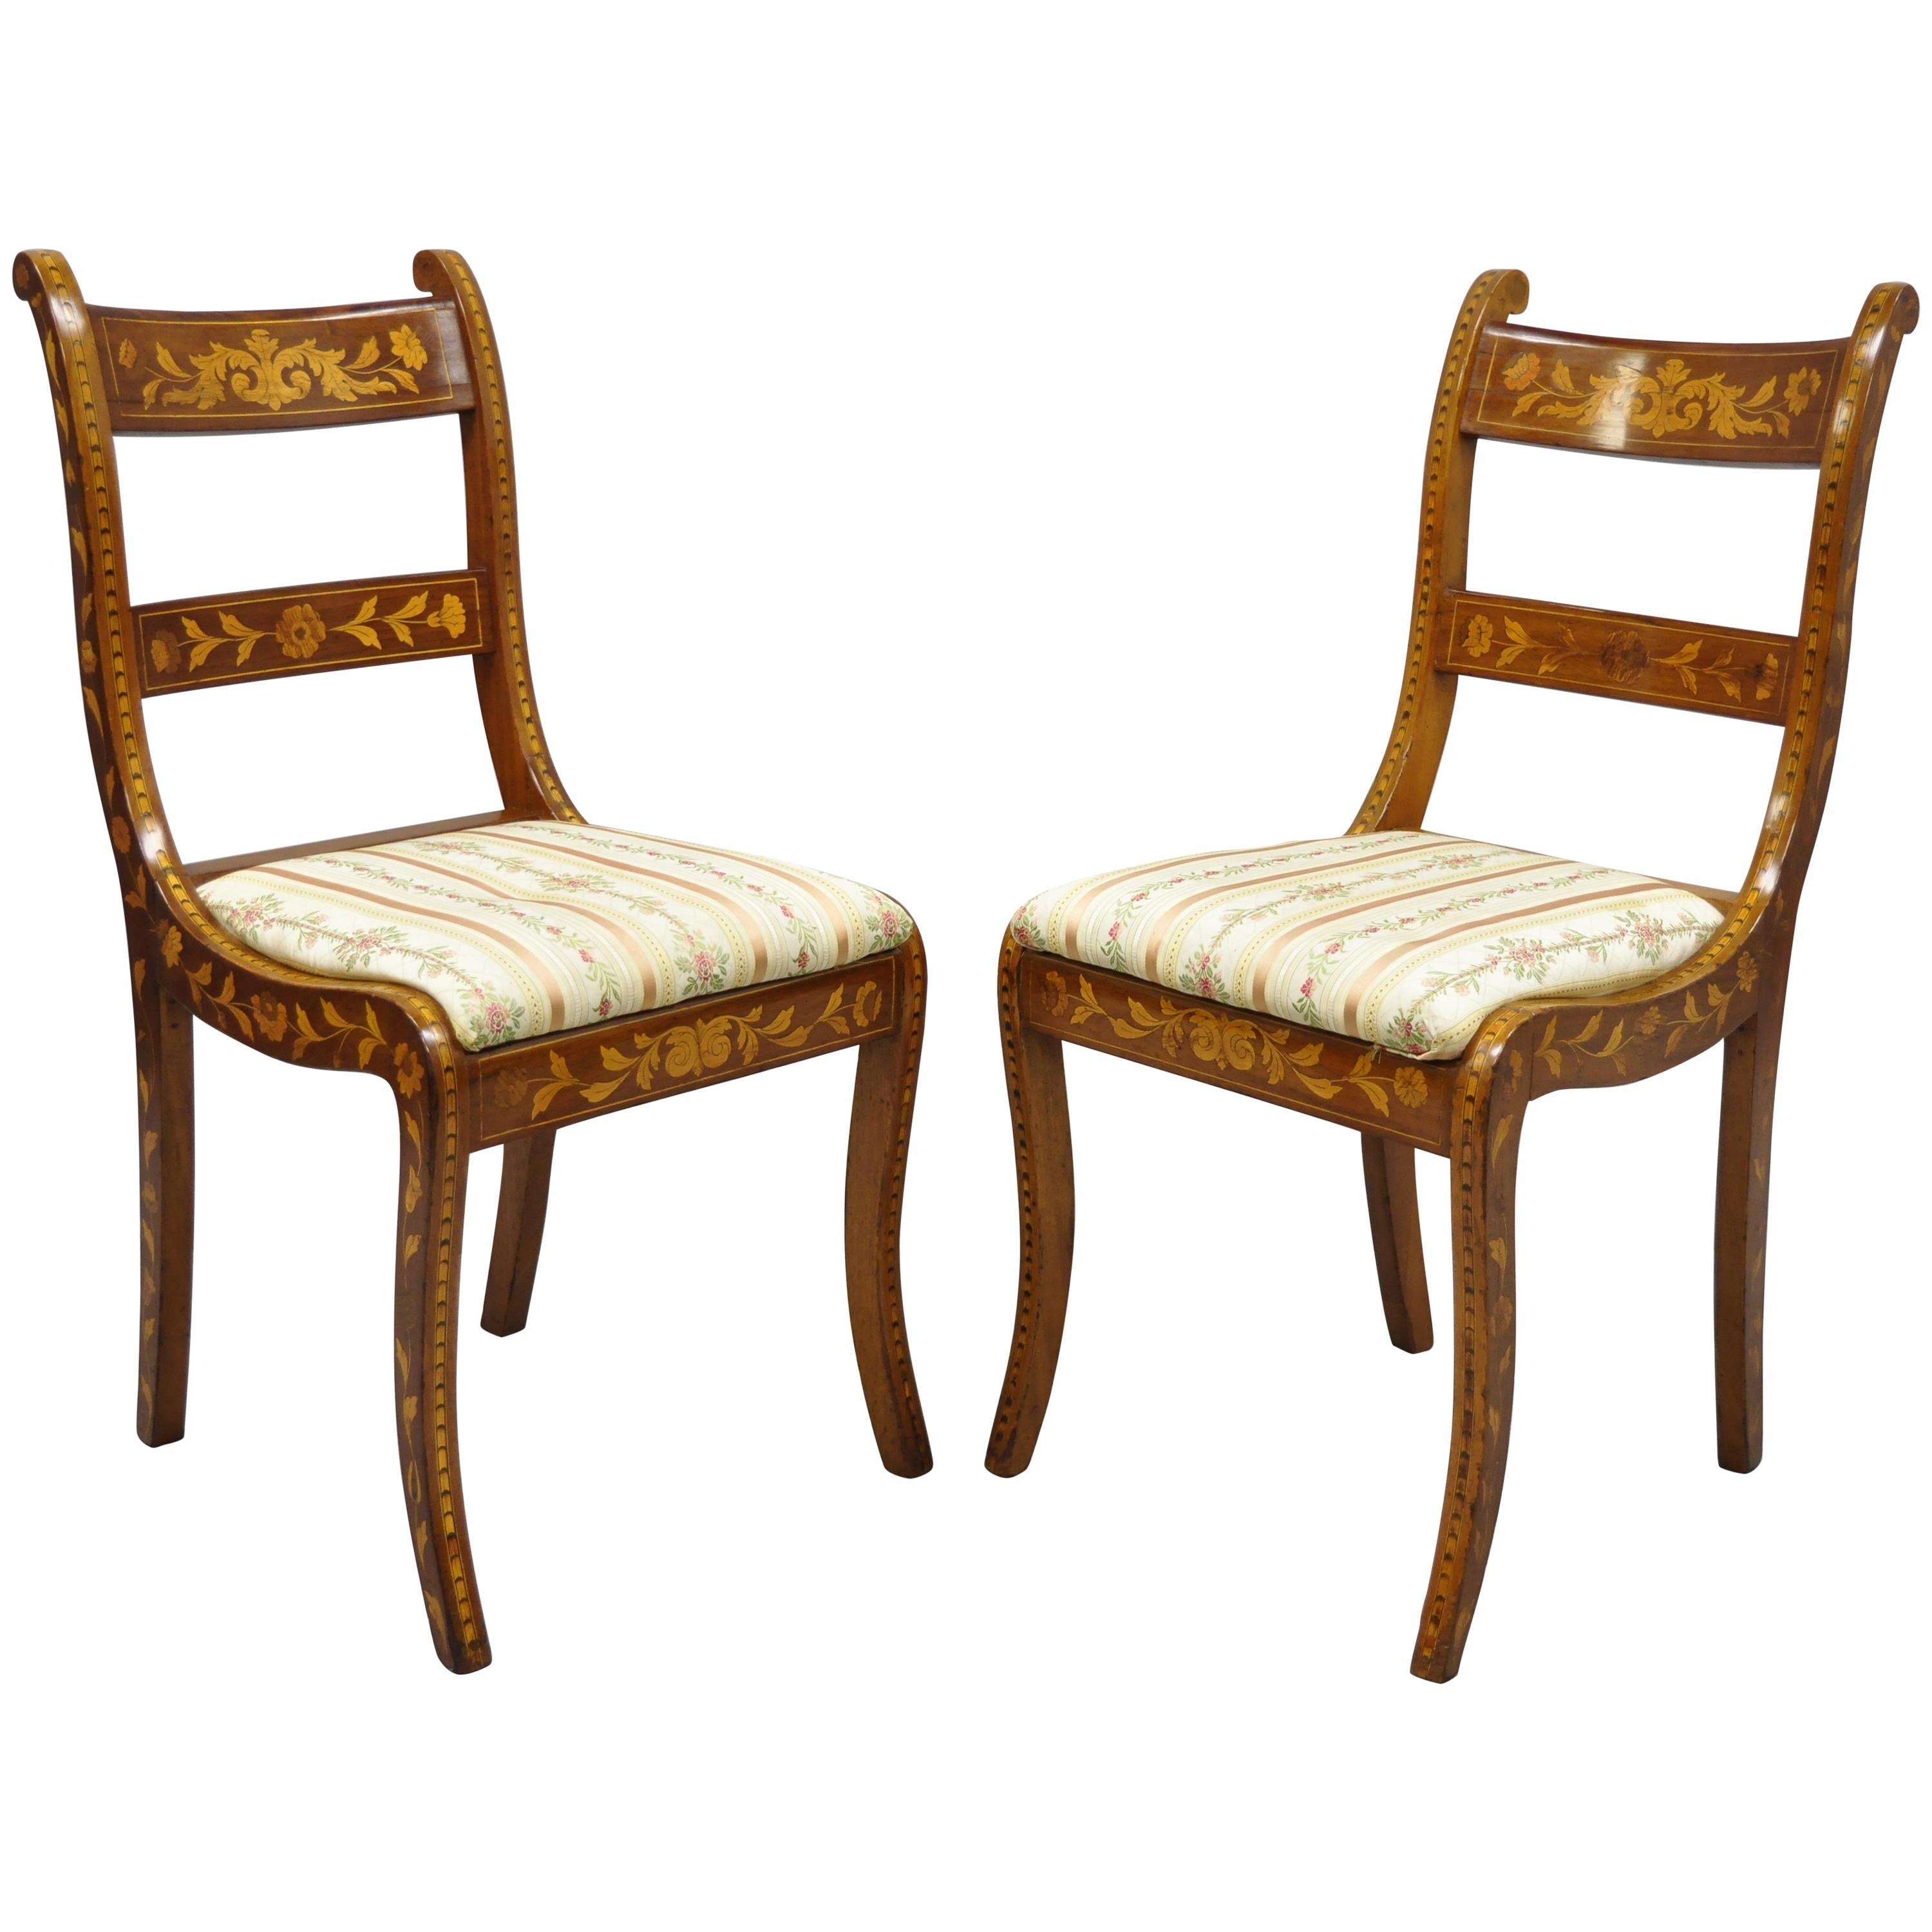 Pair of 19th Century Satinwood Dutch Marquetry Inlay Regency Side Chairs